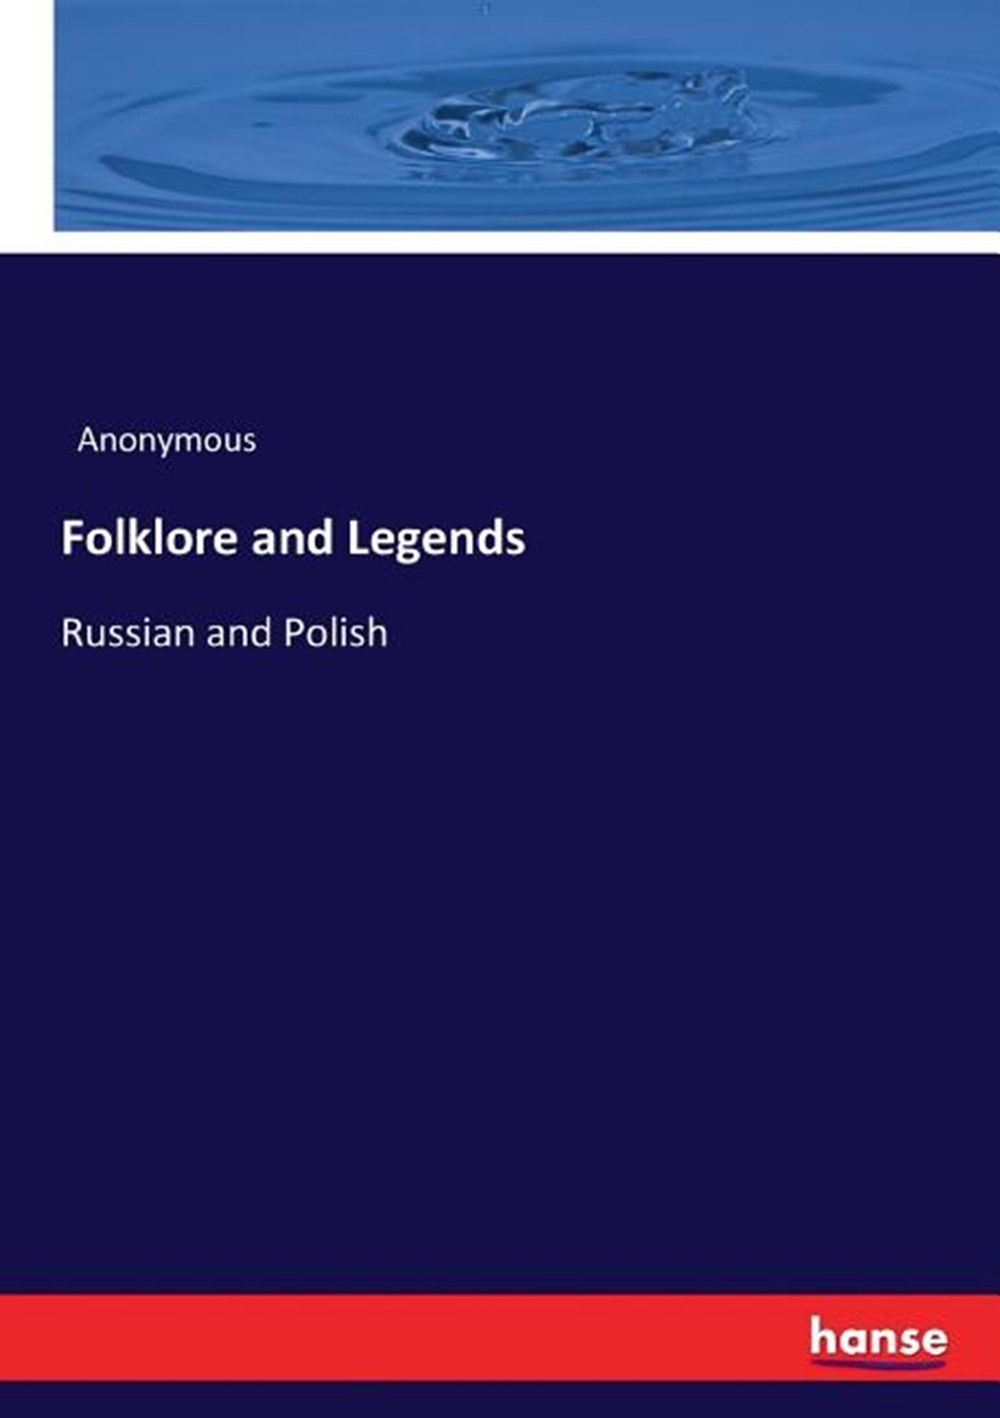 Folklore and Legends: Russian and Polish